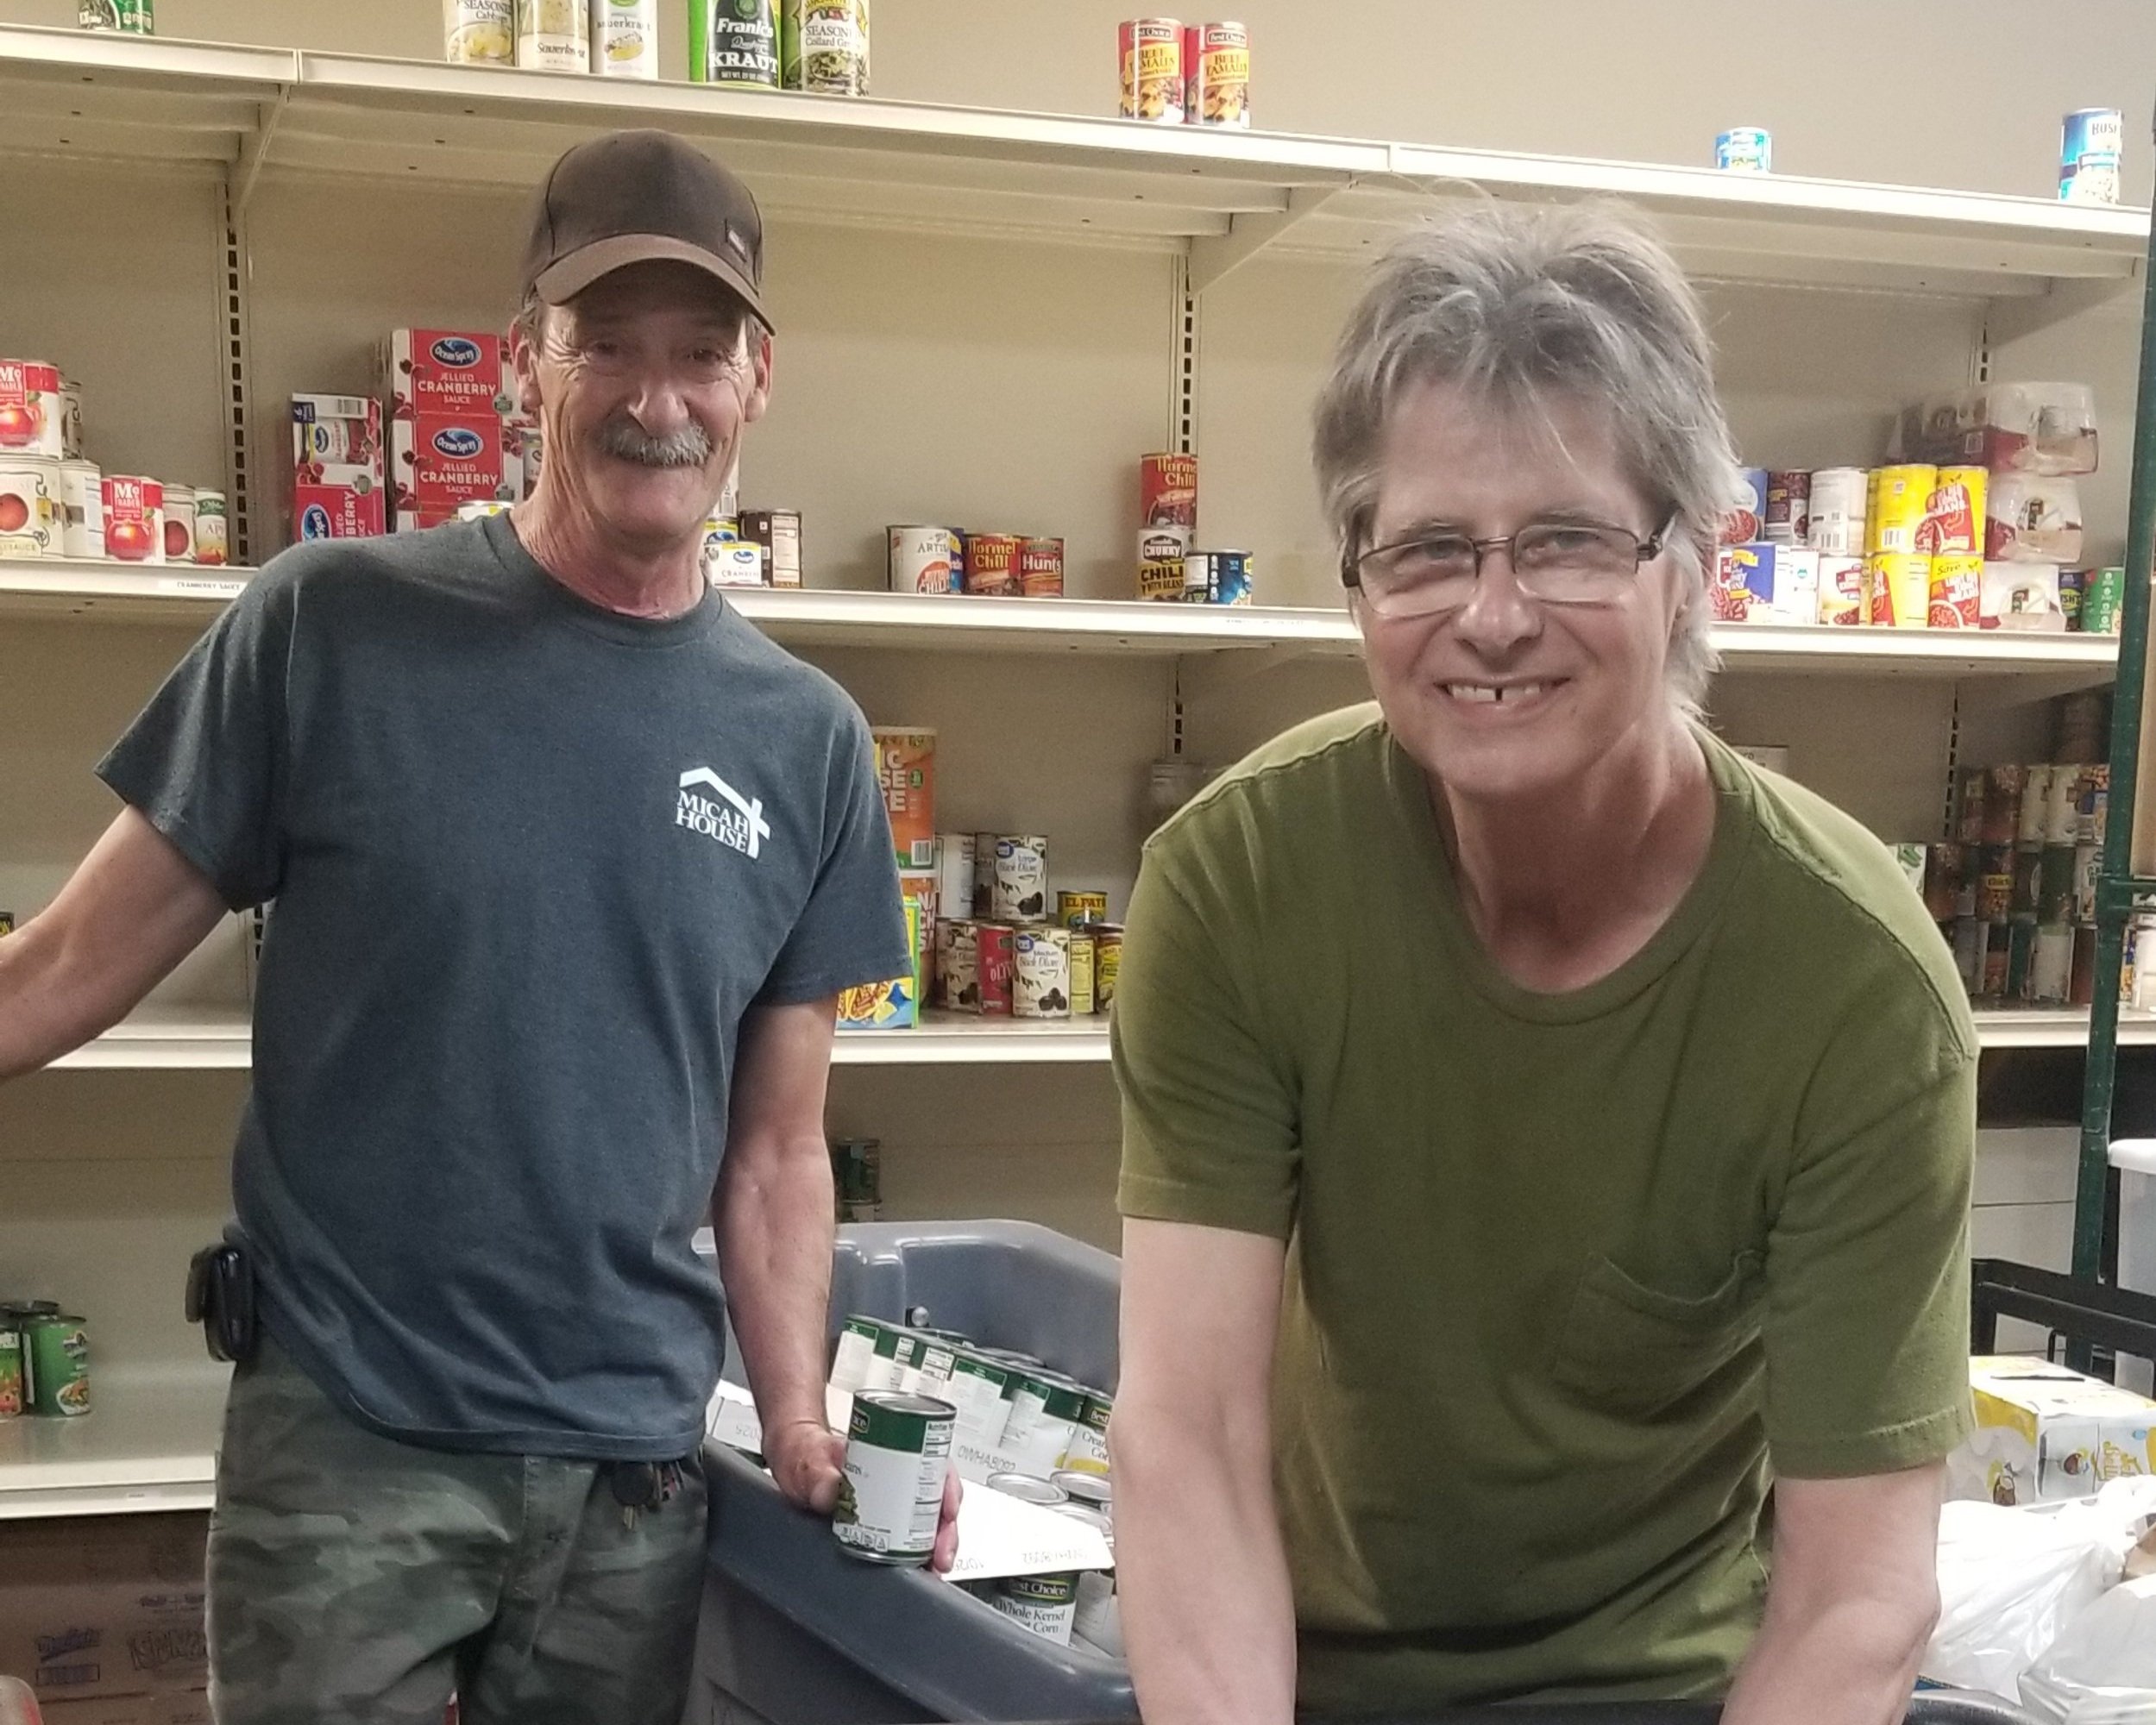   New Volunteer Shift    Help with Pantry and Donations!  